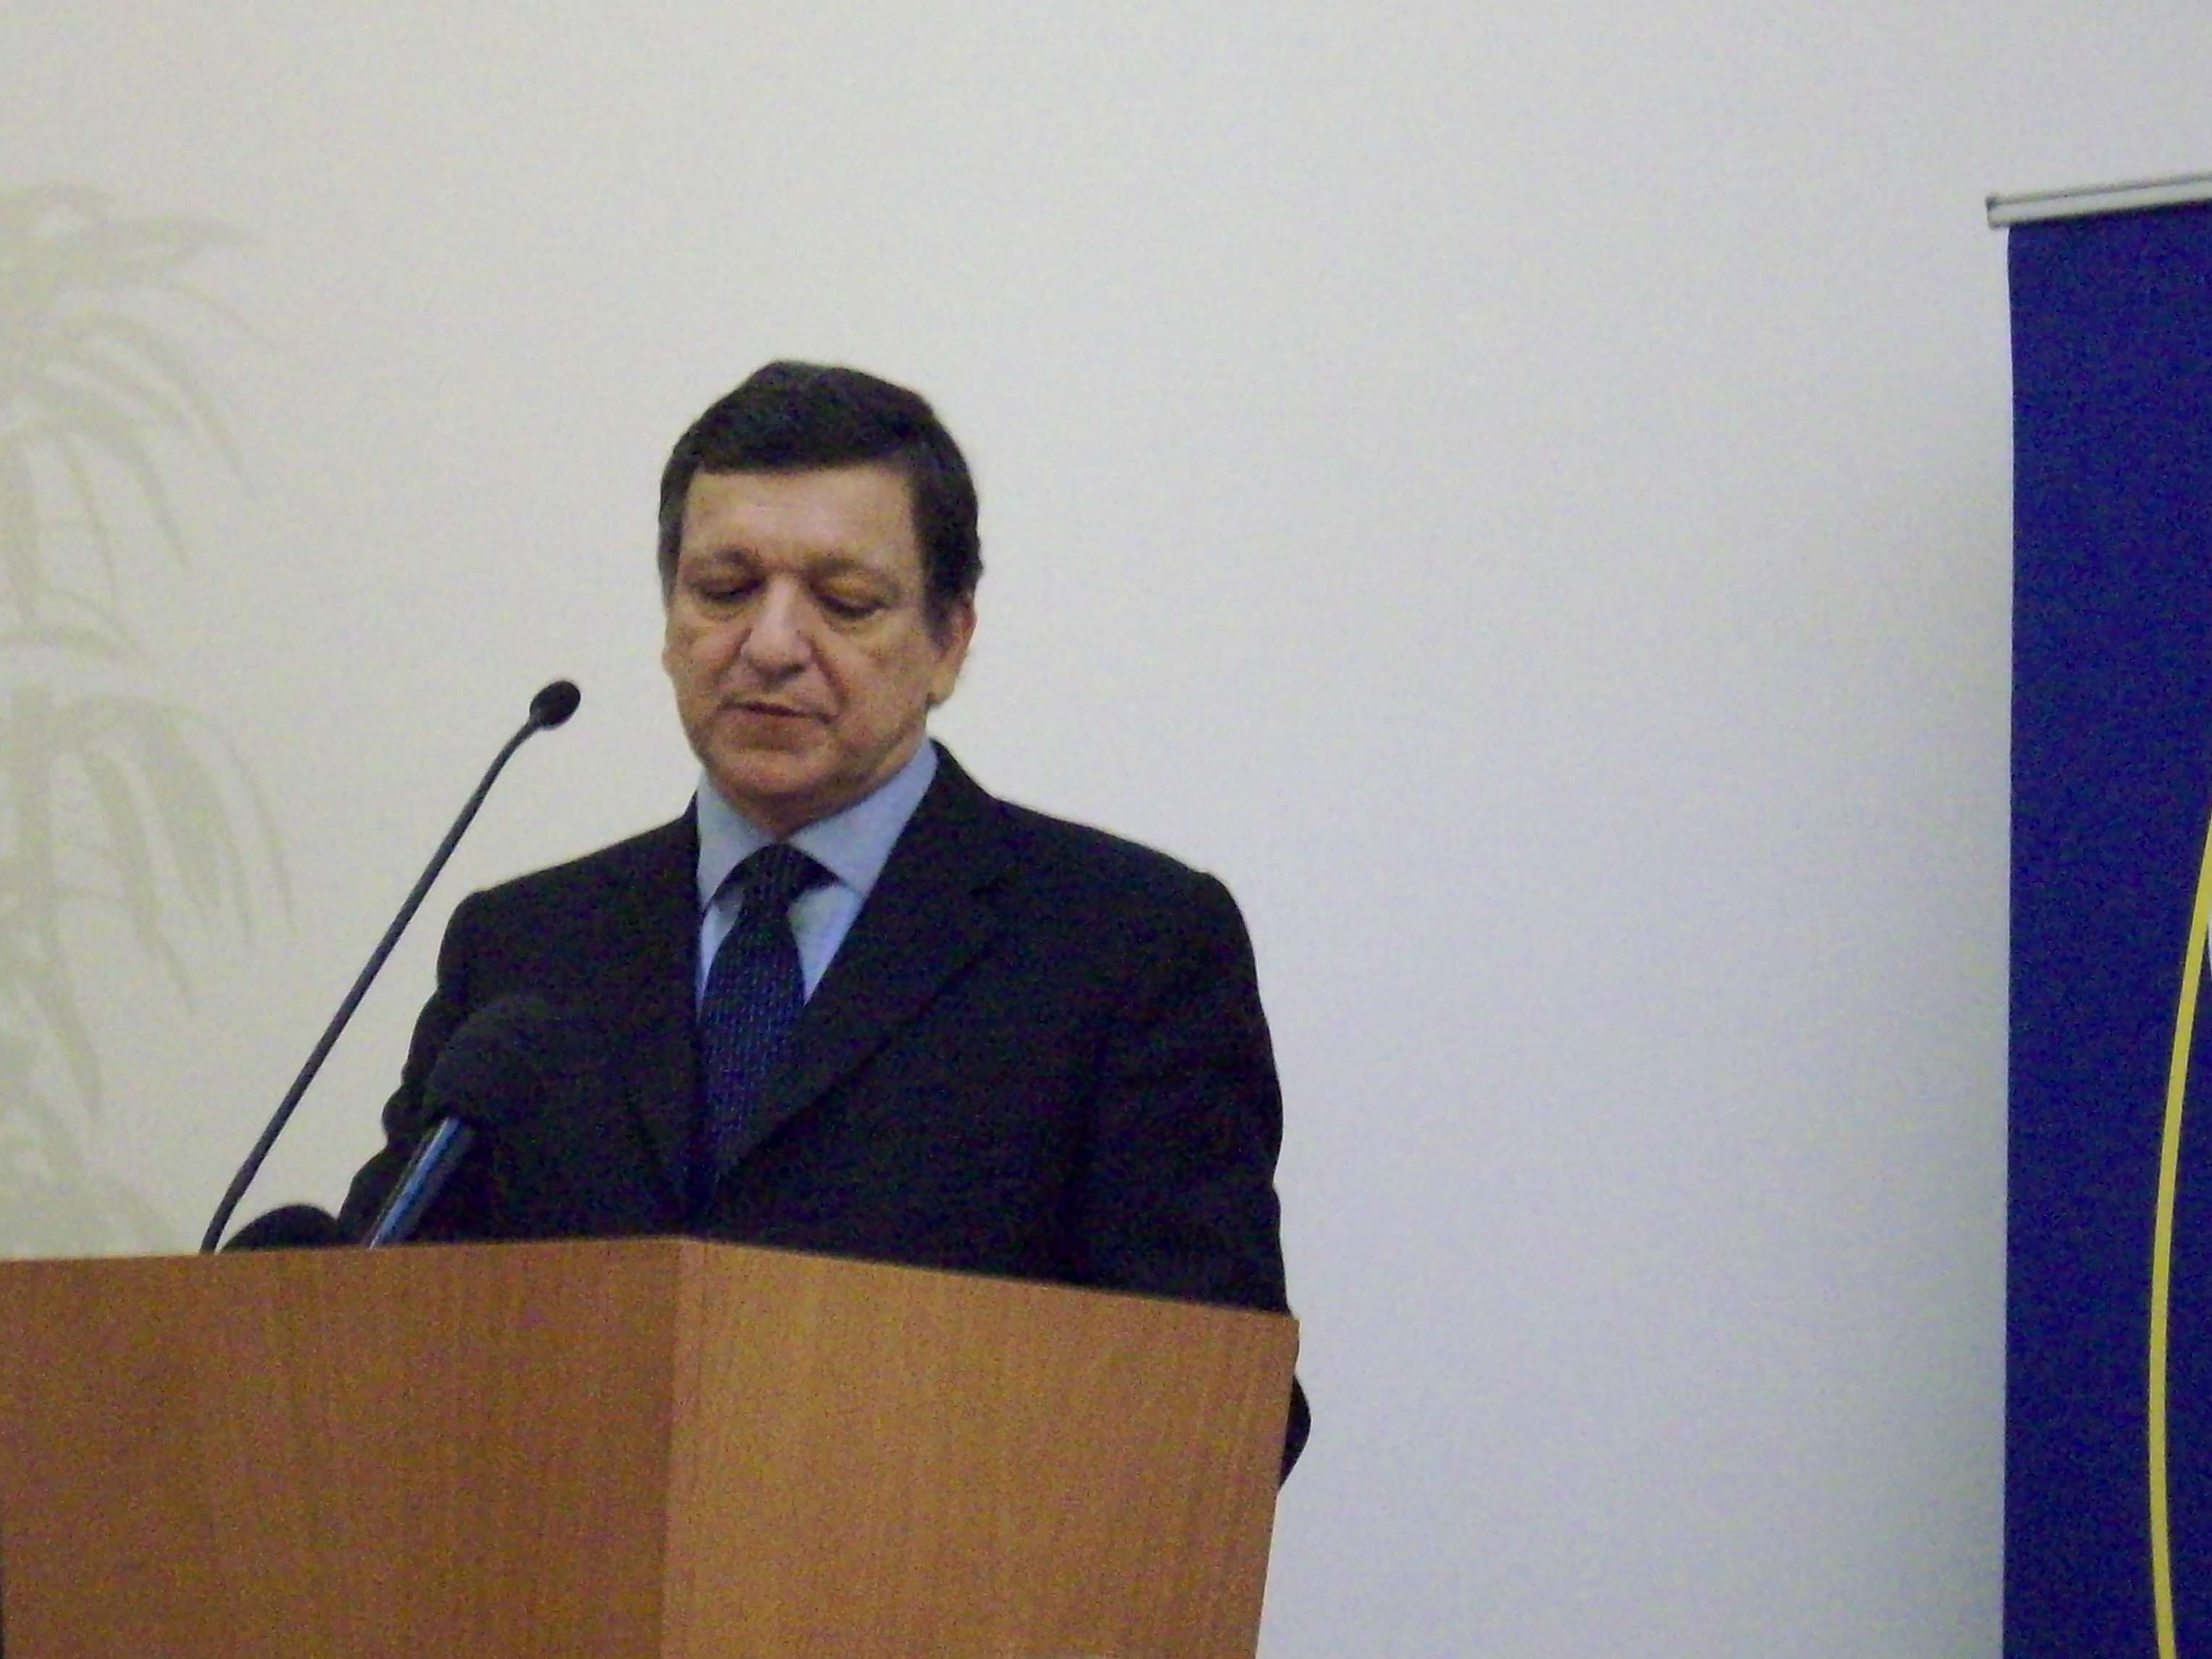 Barroso pointed to the European response as “a good example of cooperation between the Commission, the member states and the European Central Bank”, explaining how the Commission had put forward targeted measures to address specific shortcomings in the fields of capital requirements, deposit guarantees and accountancy rules.